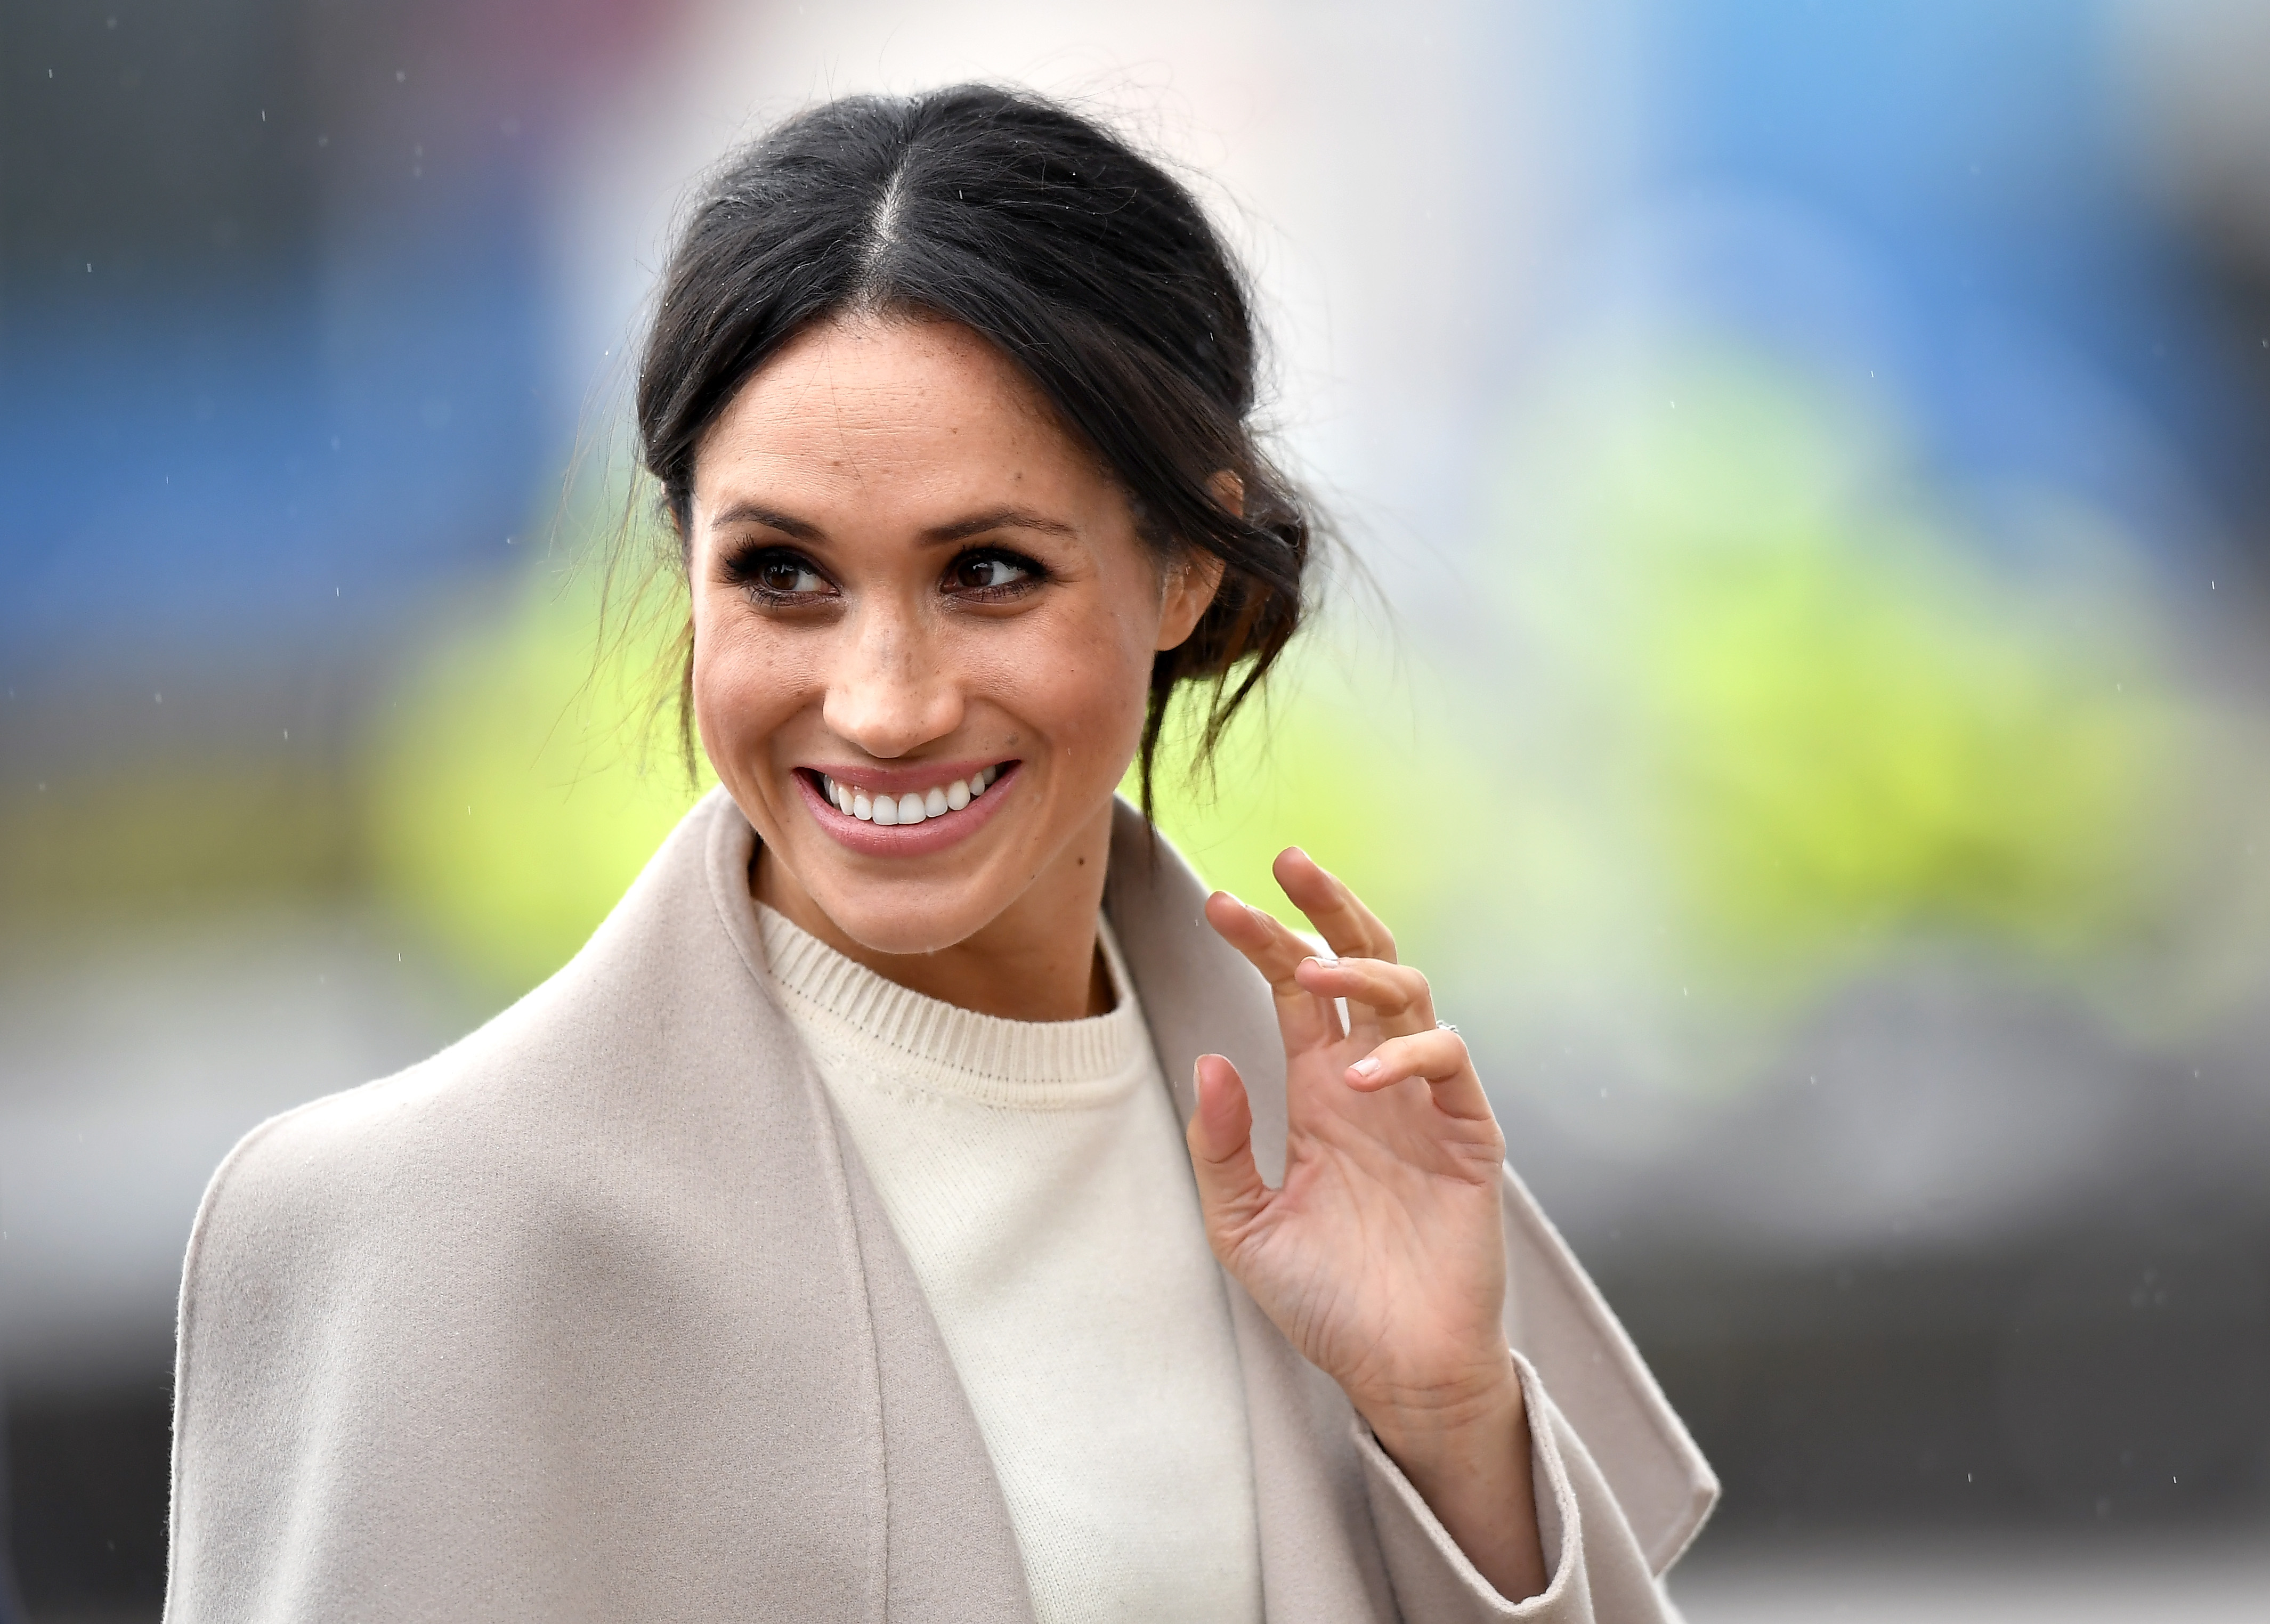 Meghan Markle smiling and giving a wave to the crowd during visit to Northern Ireland